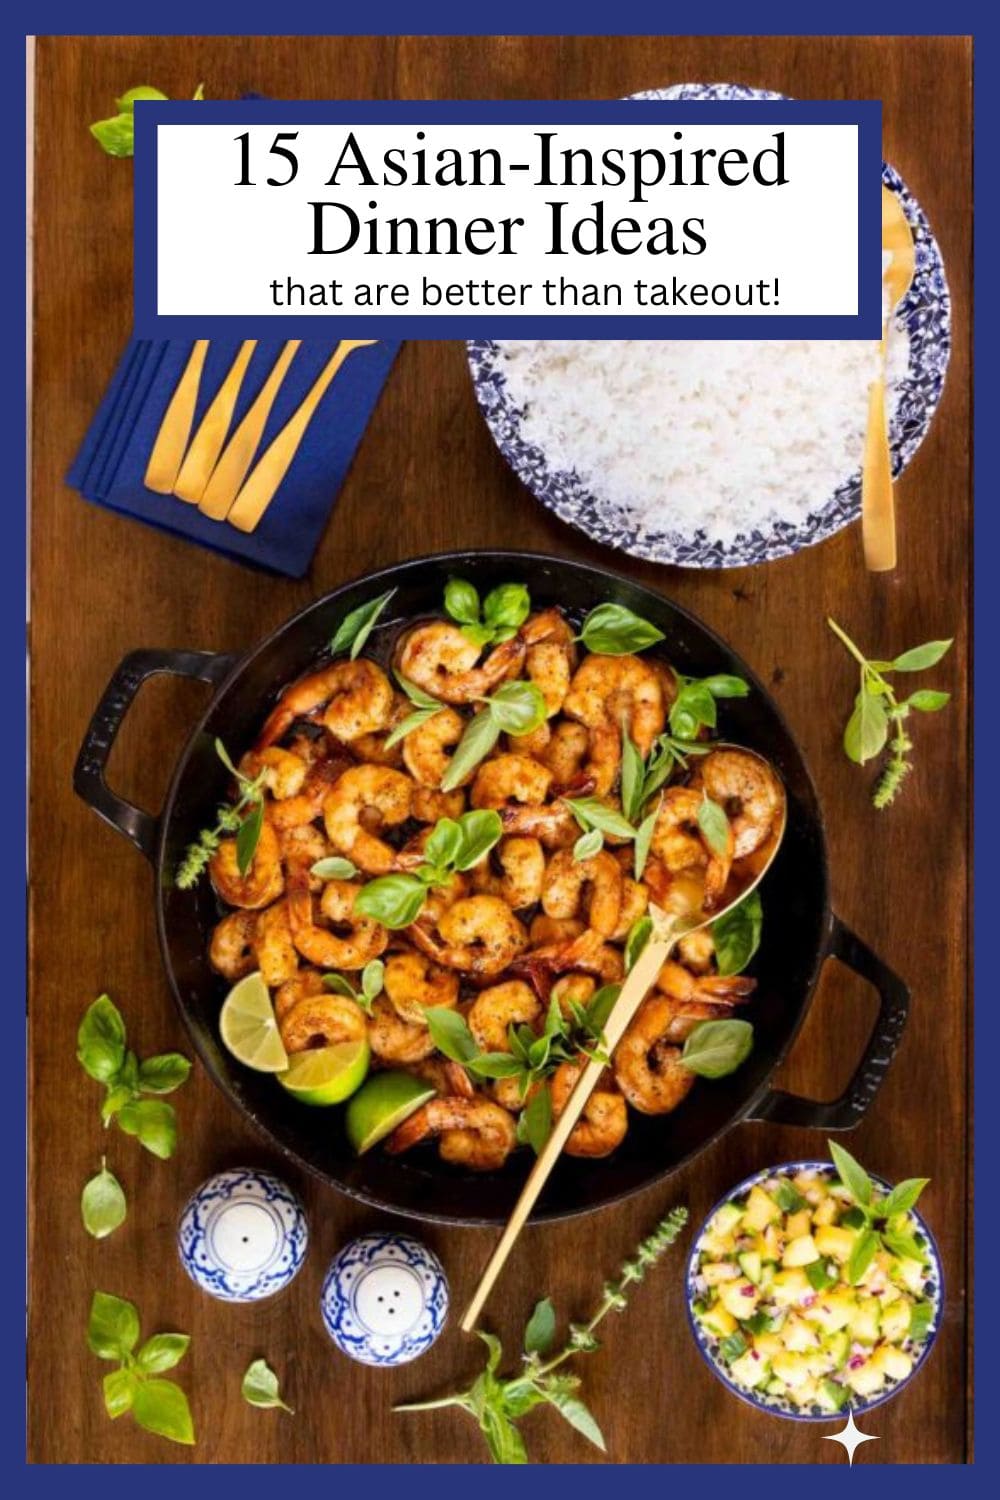 Better (and Healthier) Than Takeout! 15 Fresh Asian-Inspired Recipes!